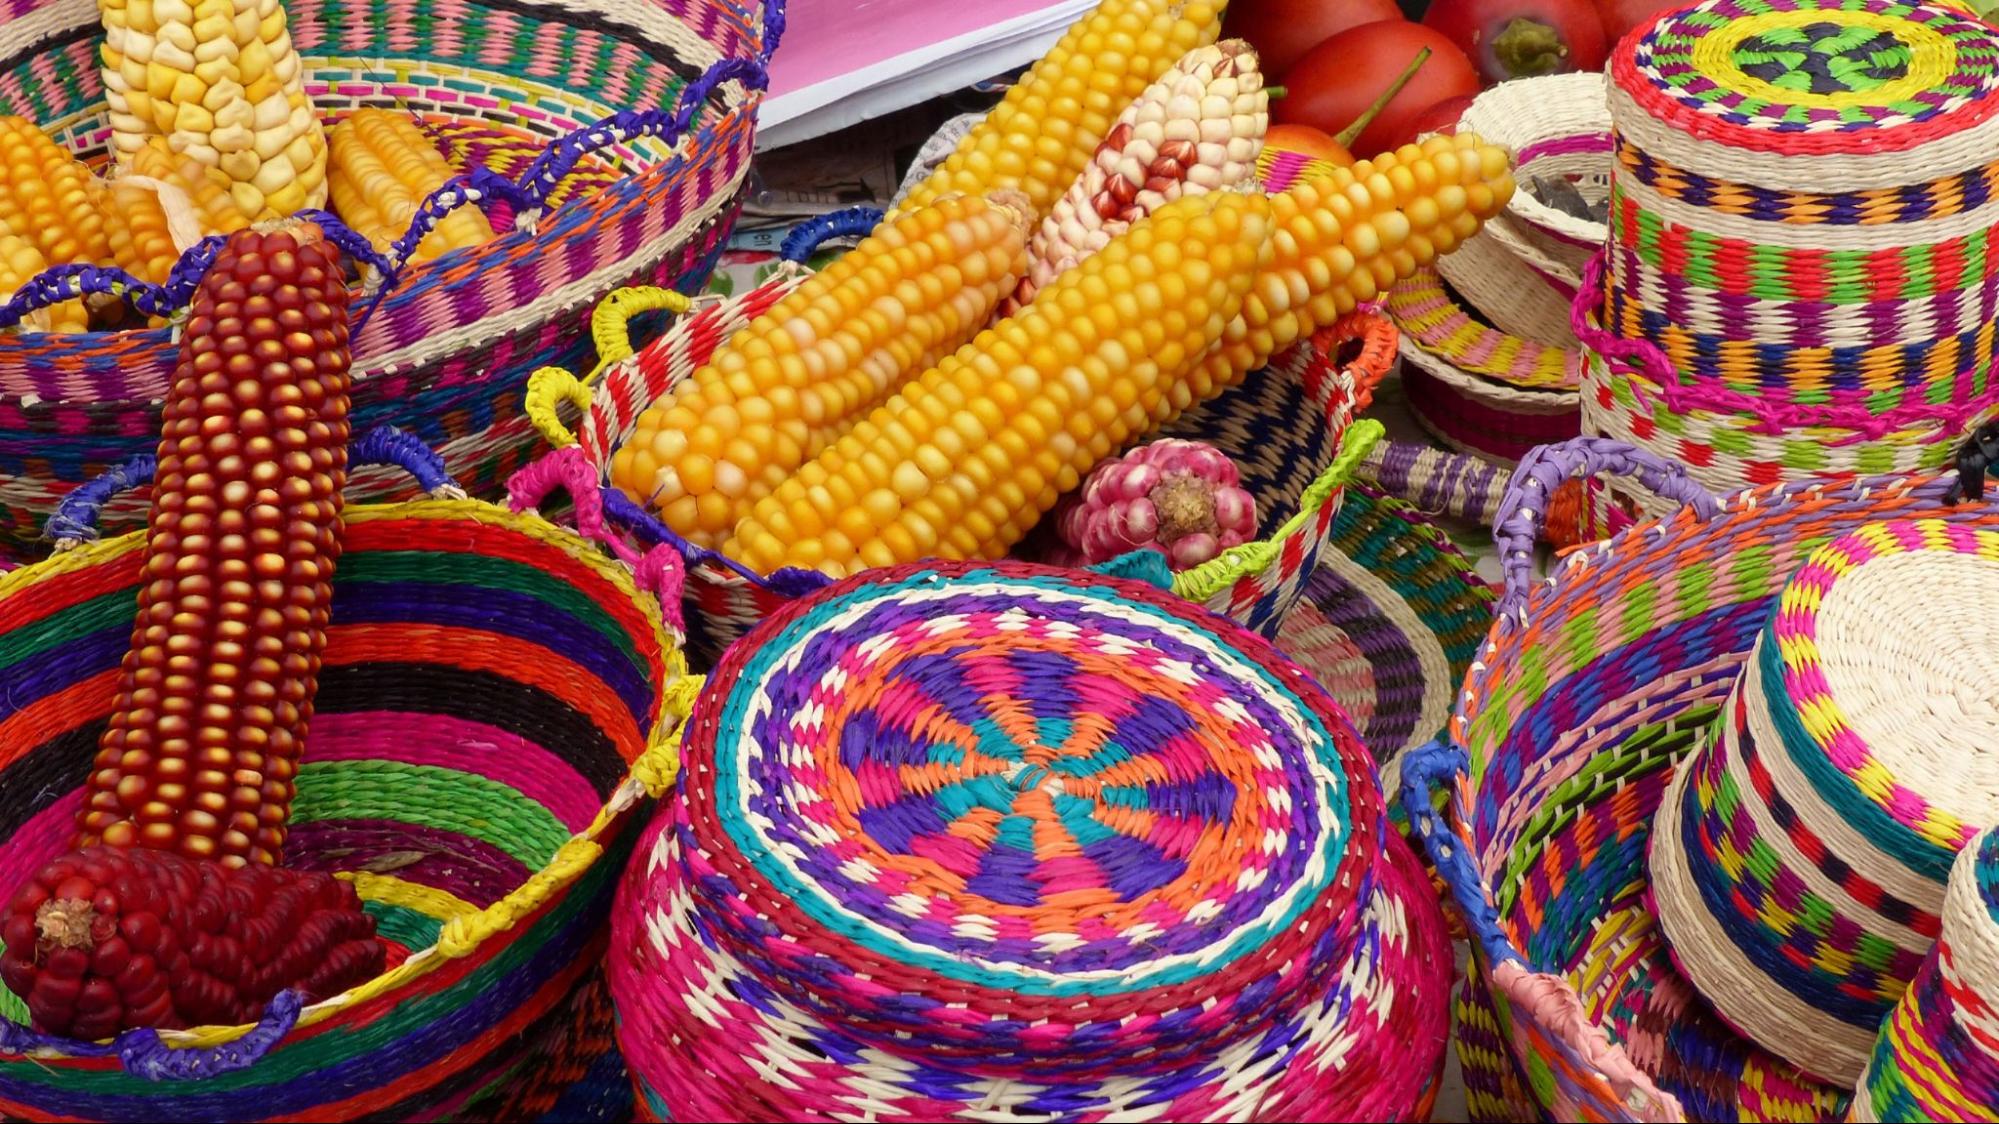 Colorful cubs of corn - Indian corn, and yellow corn - along with colorful wicker souvenirs baskets made from straw on display at indigenous seed festival in Cuenca, Ecuador